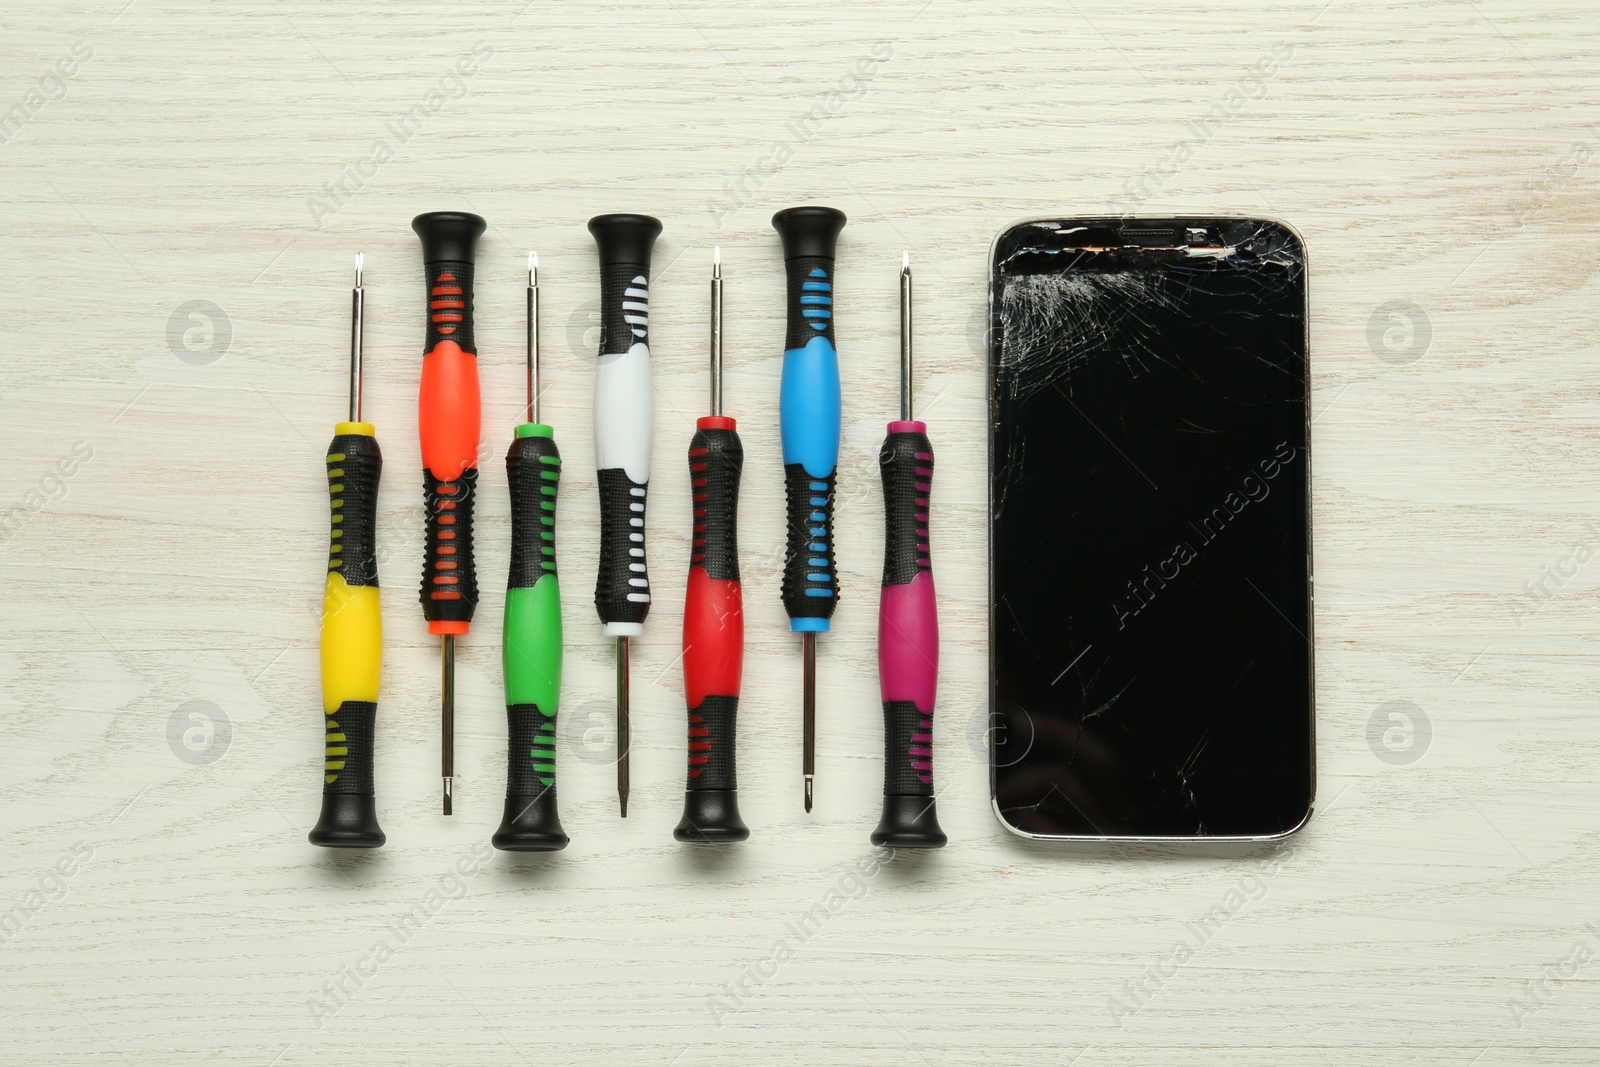 Photo of Damaged smartphone and repair tools on wooden background, flat lay